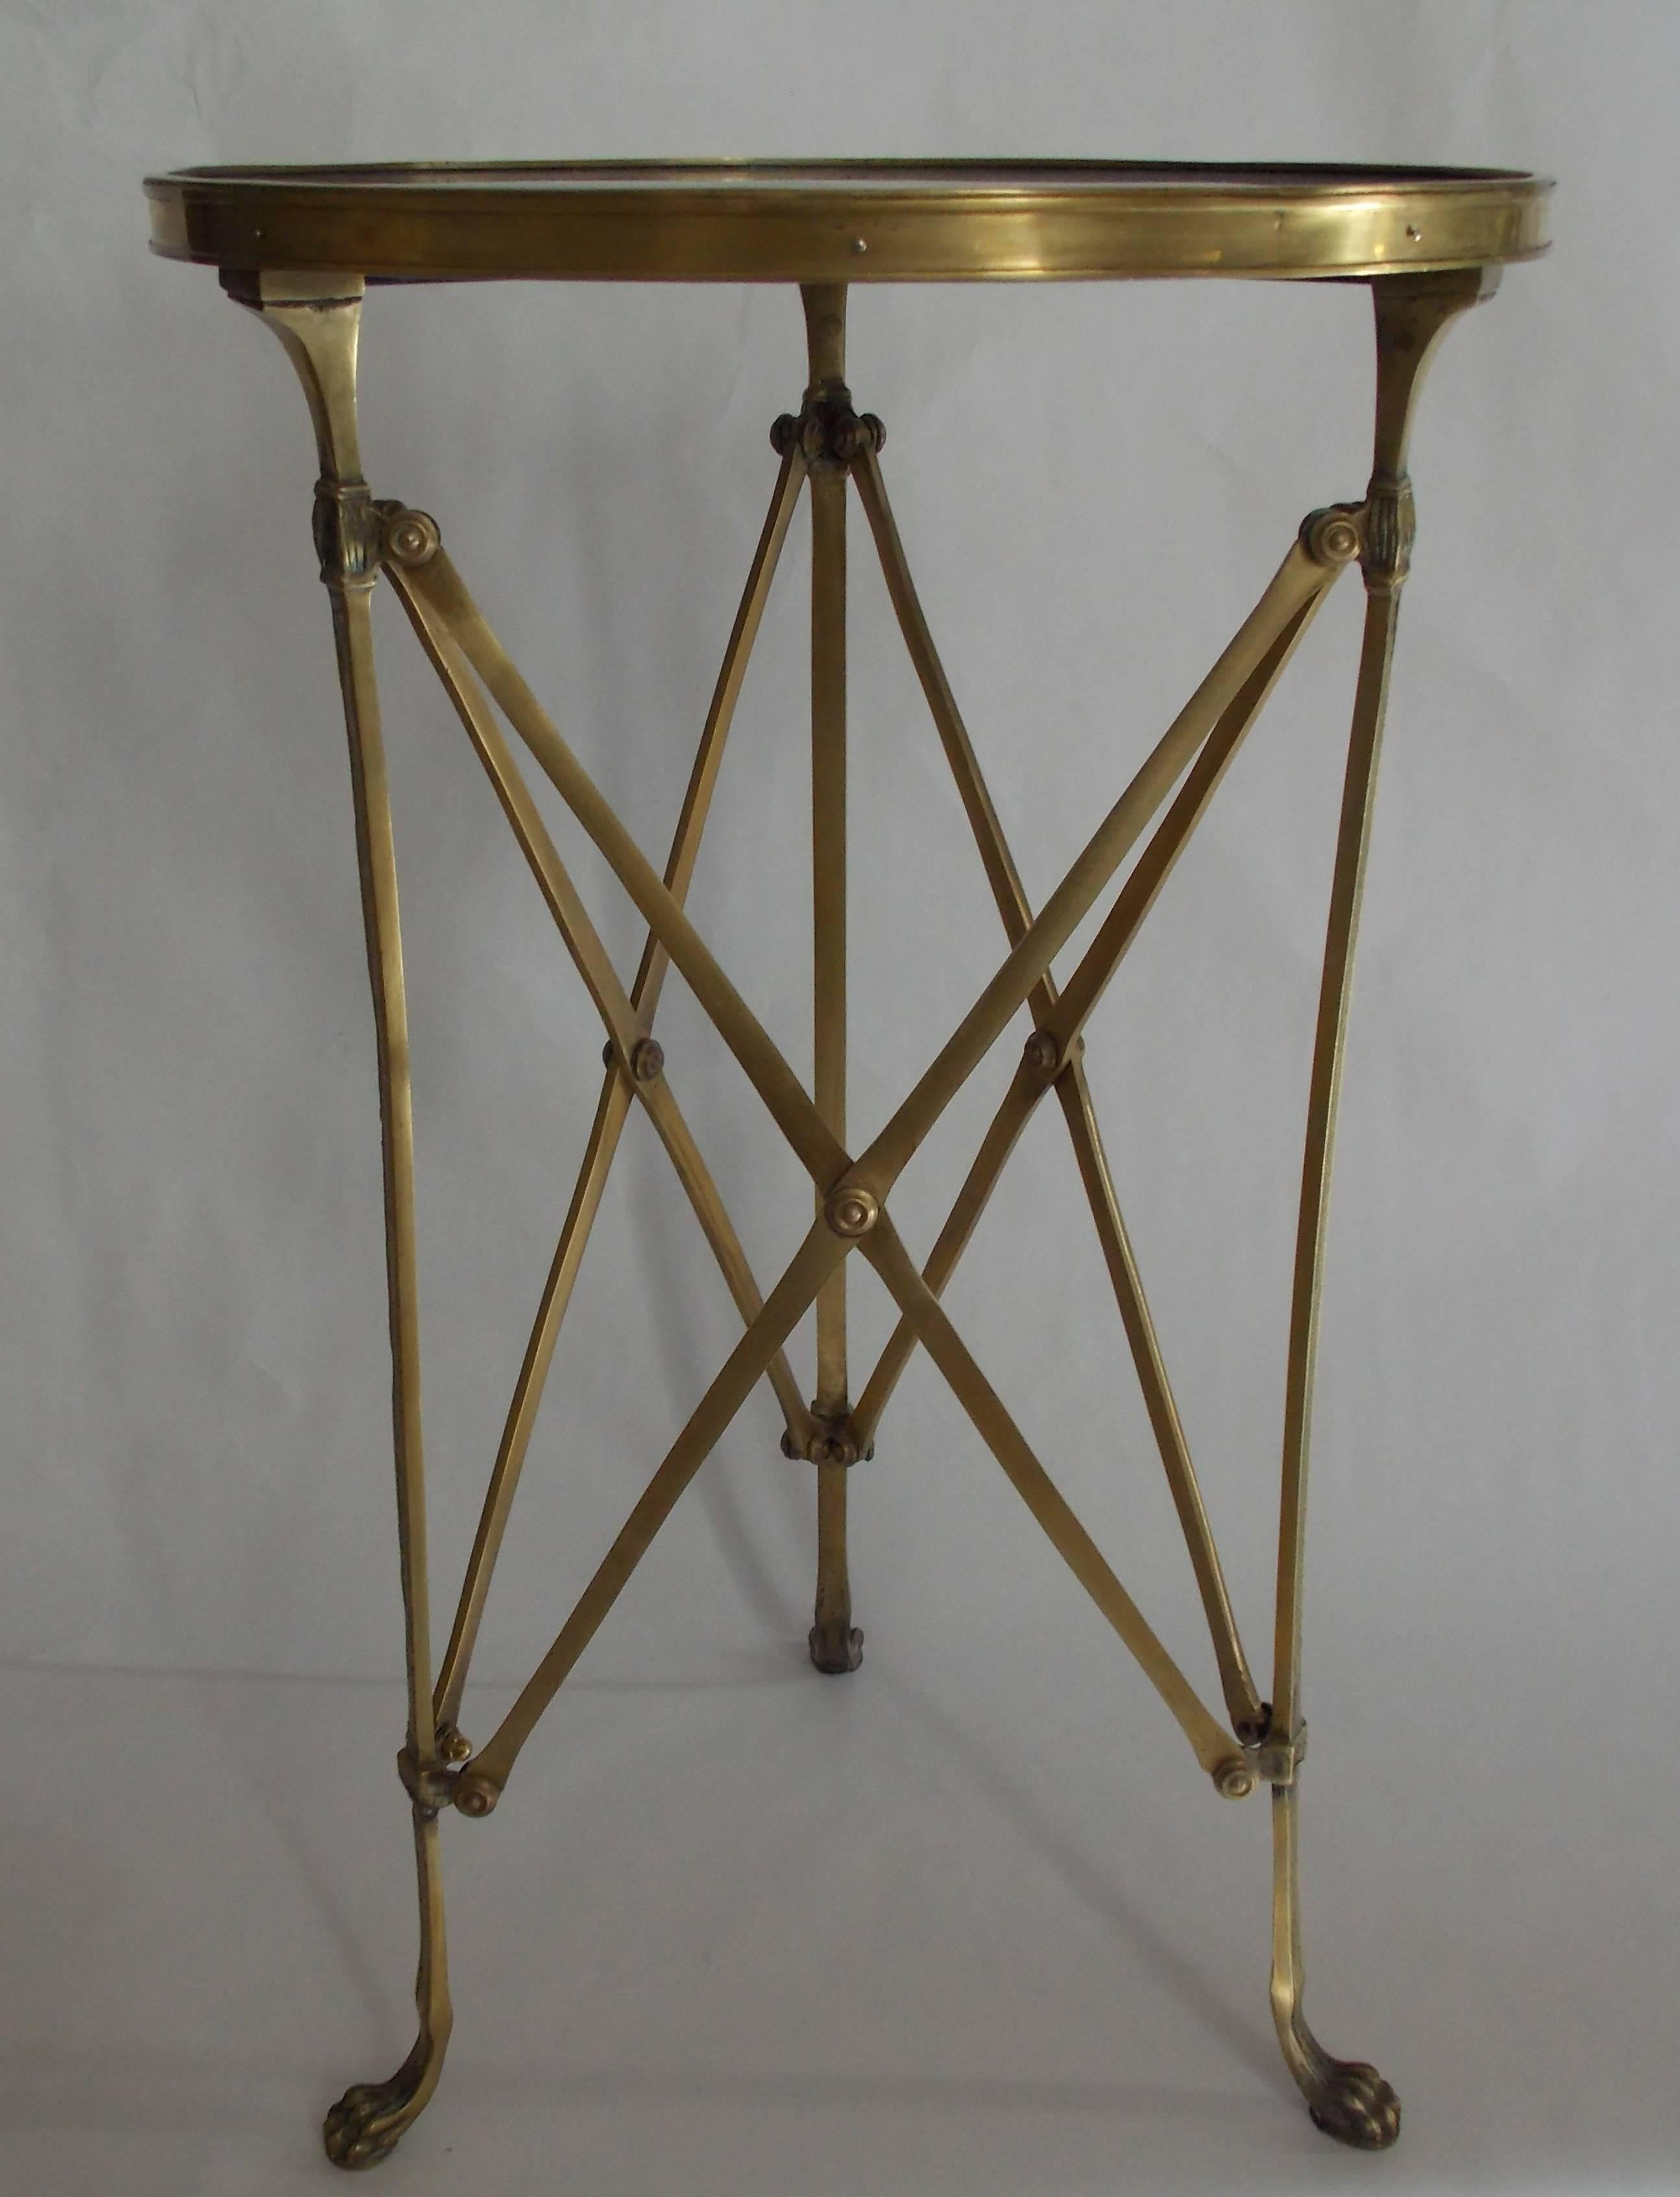 20th Century Pair of French Brass Neoclassical Gueridon Tables in the Jansen Manner